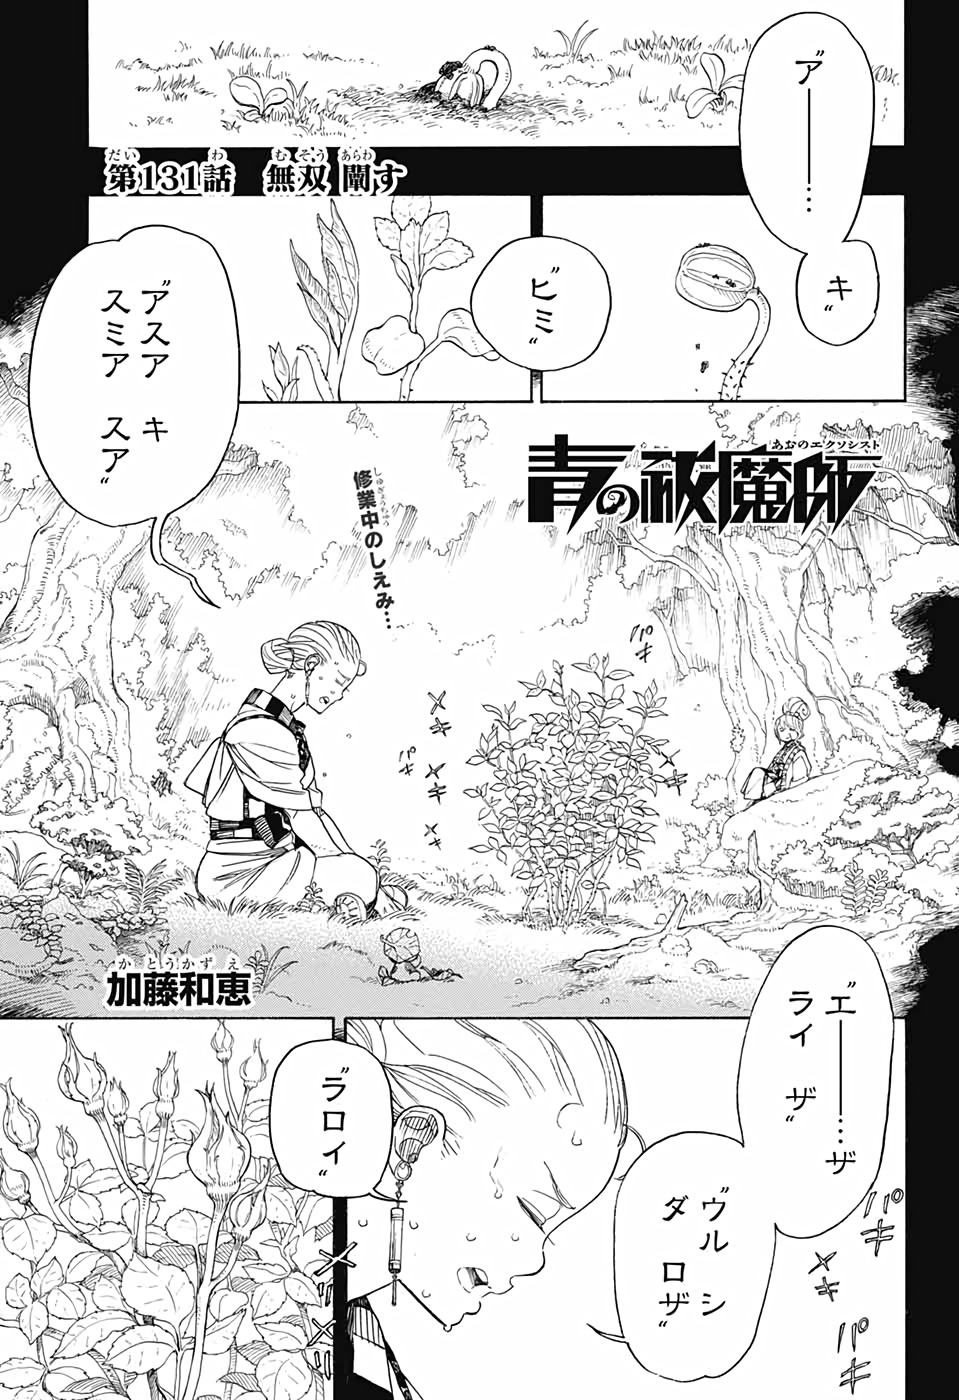 Ao no Exorcist - Chapter 131 - Page 1